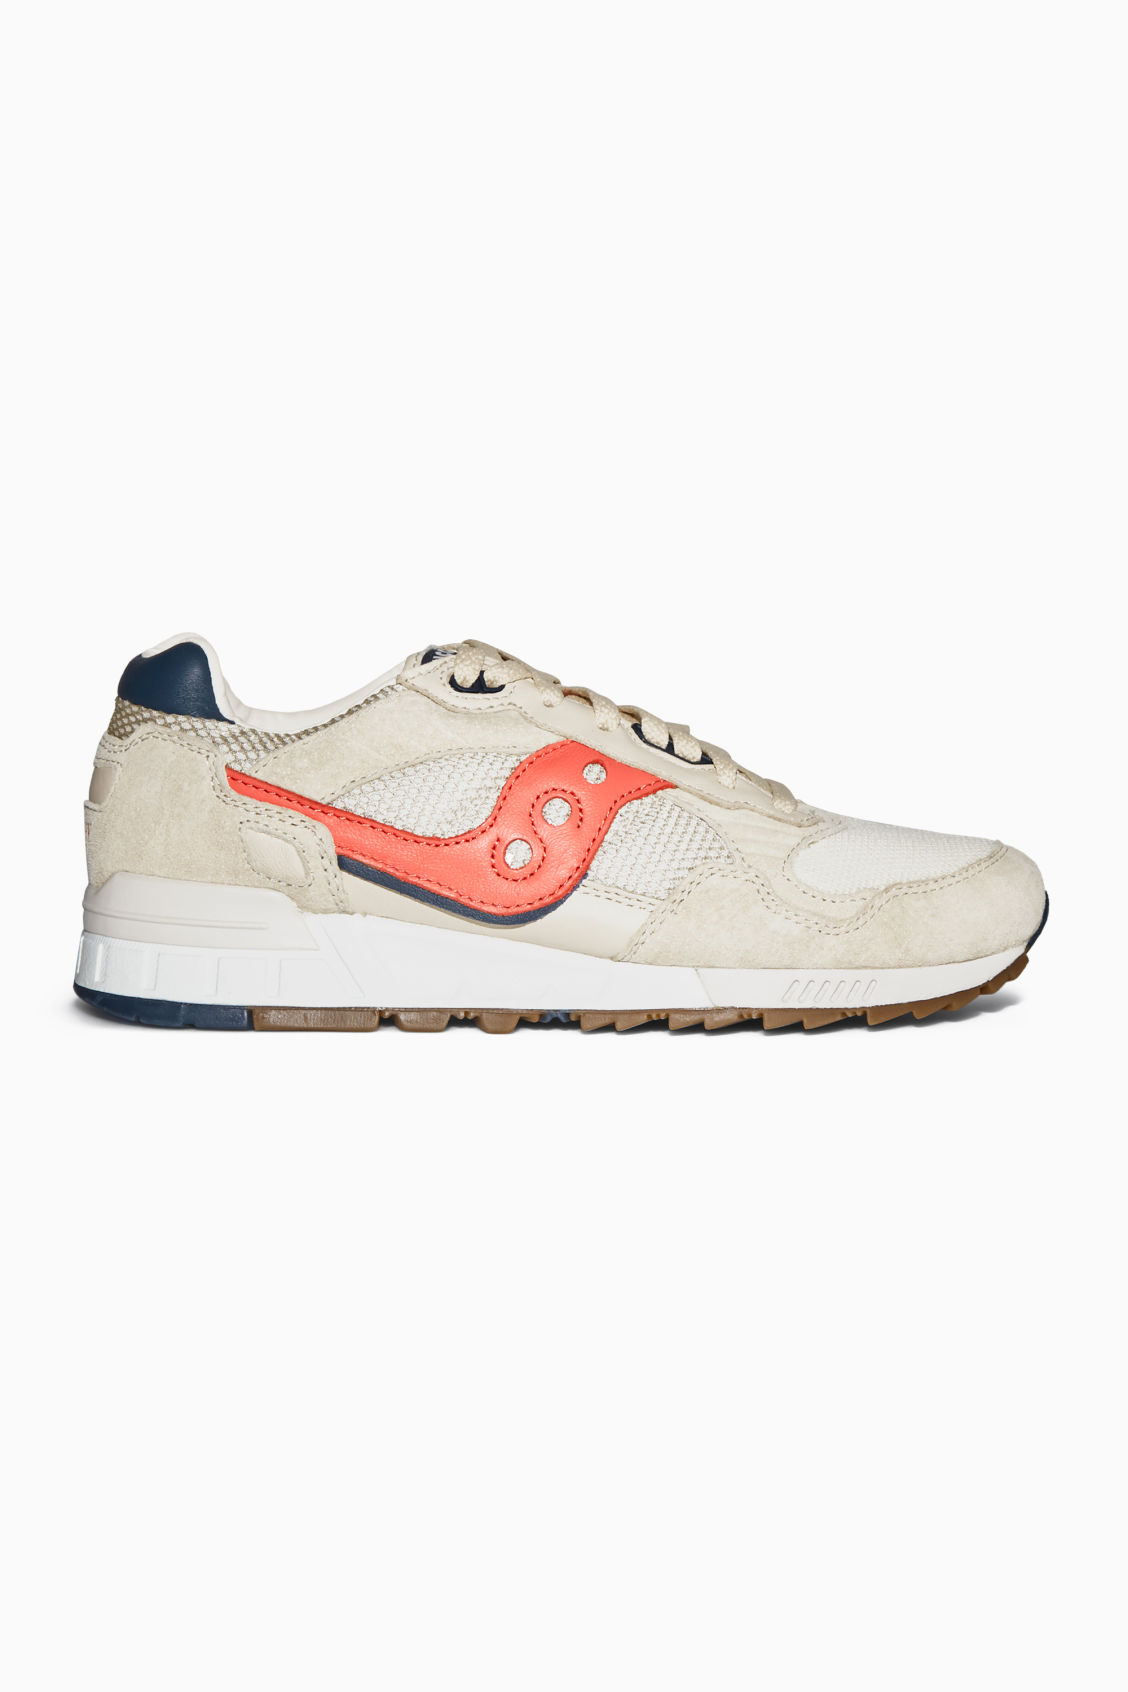 SAUCONY SHADOW 5000 TRAINERS